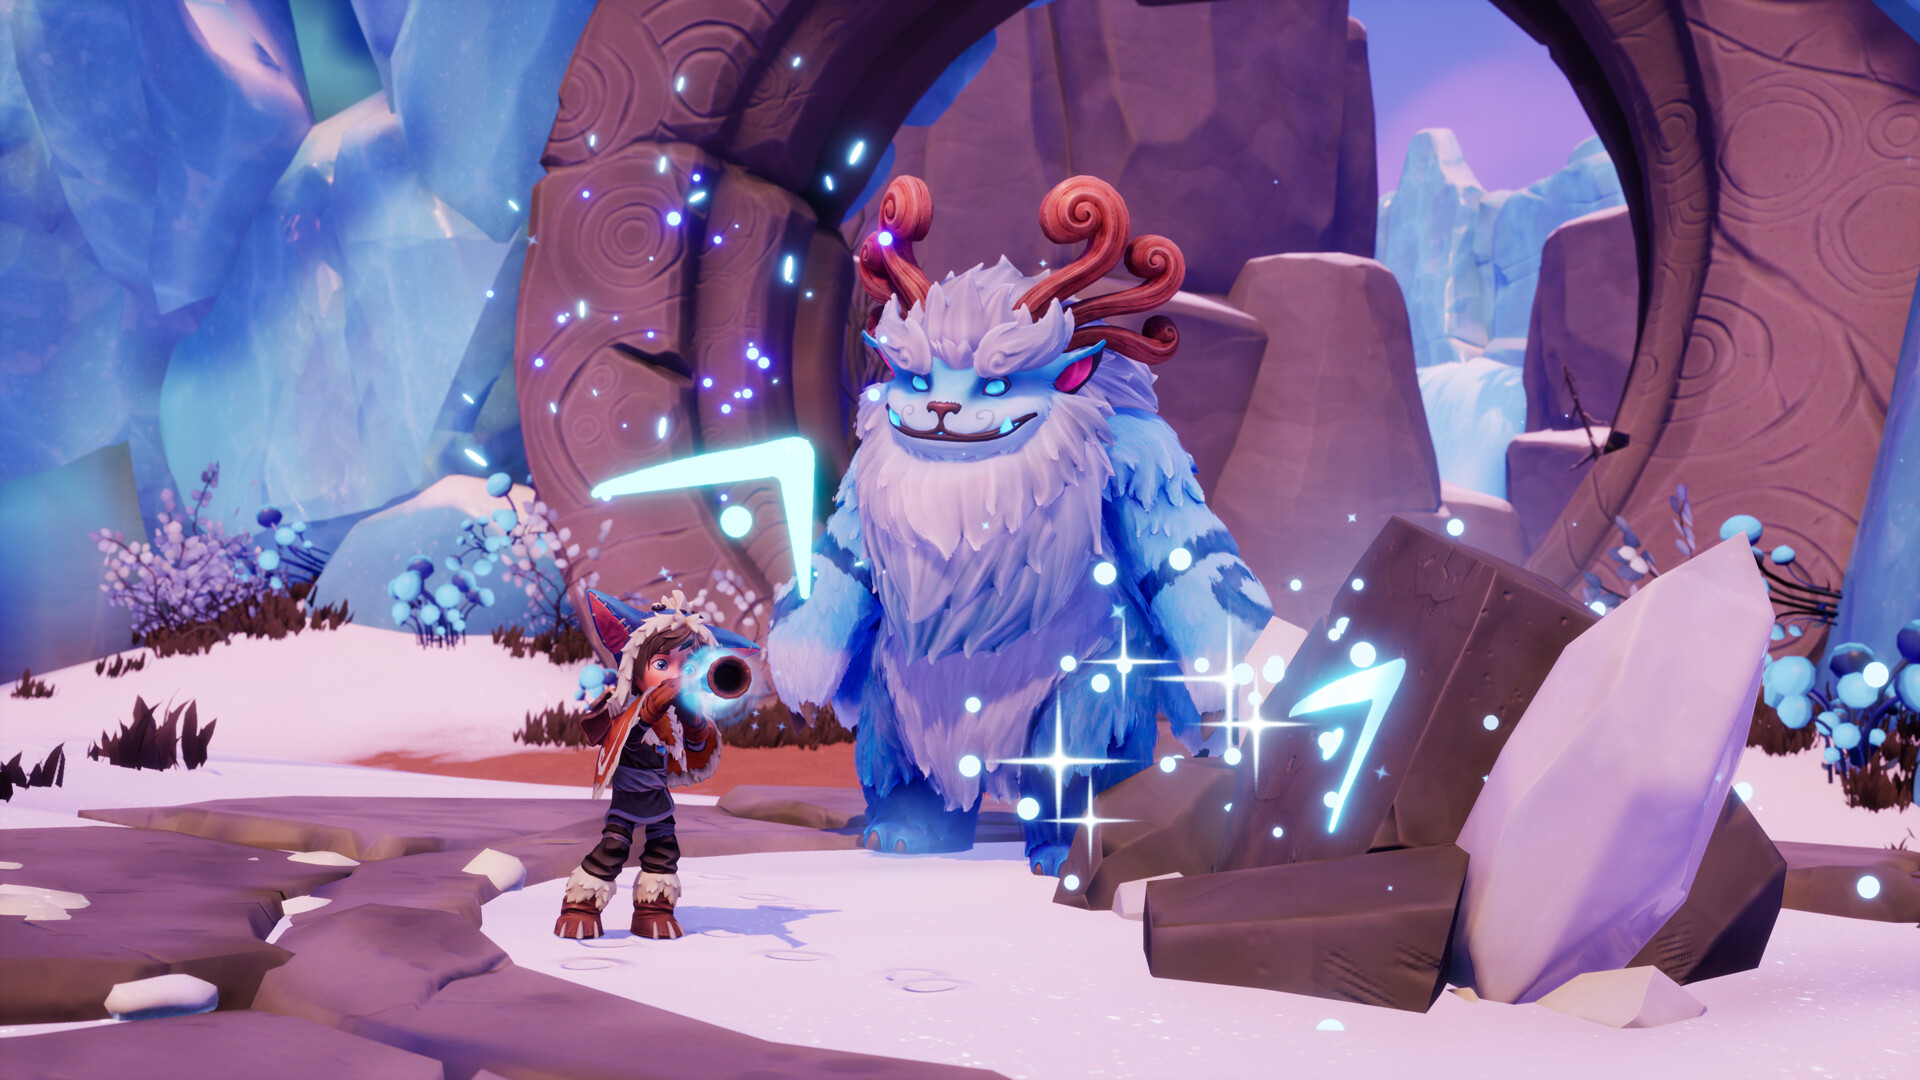 Nunu plays his flute while Willump watches on in a screenshot from Song of Nunu